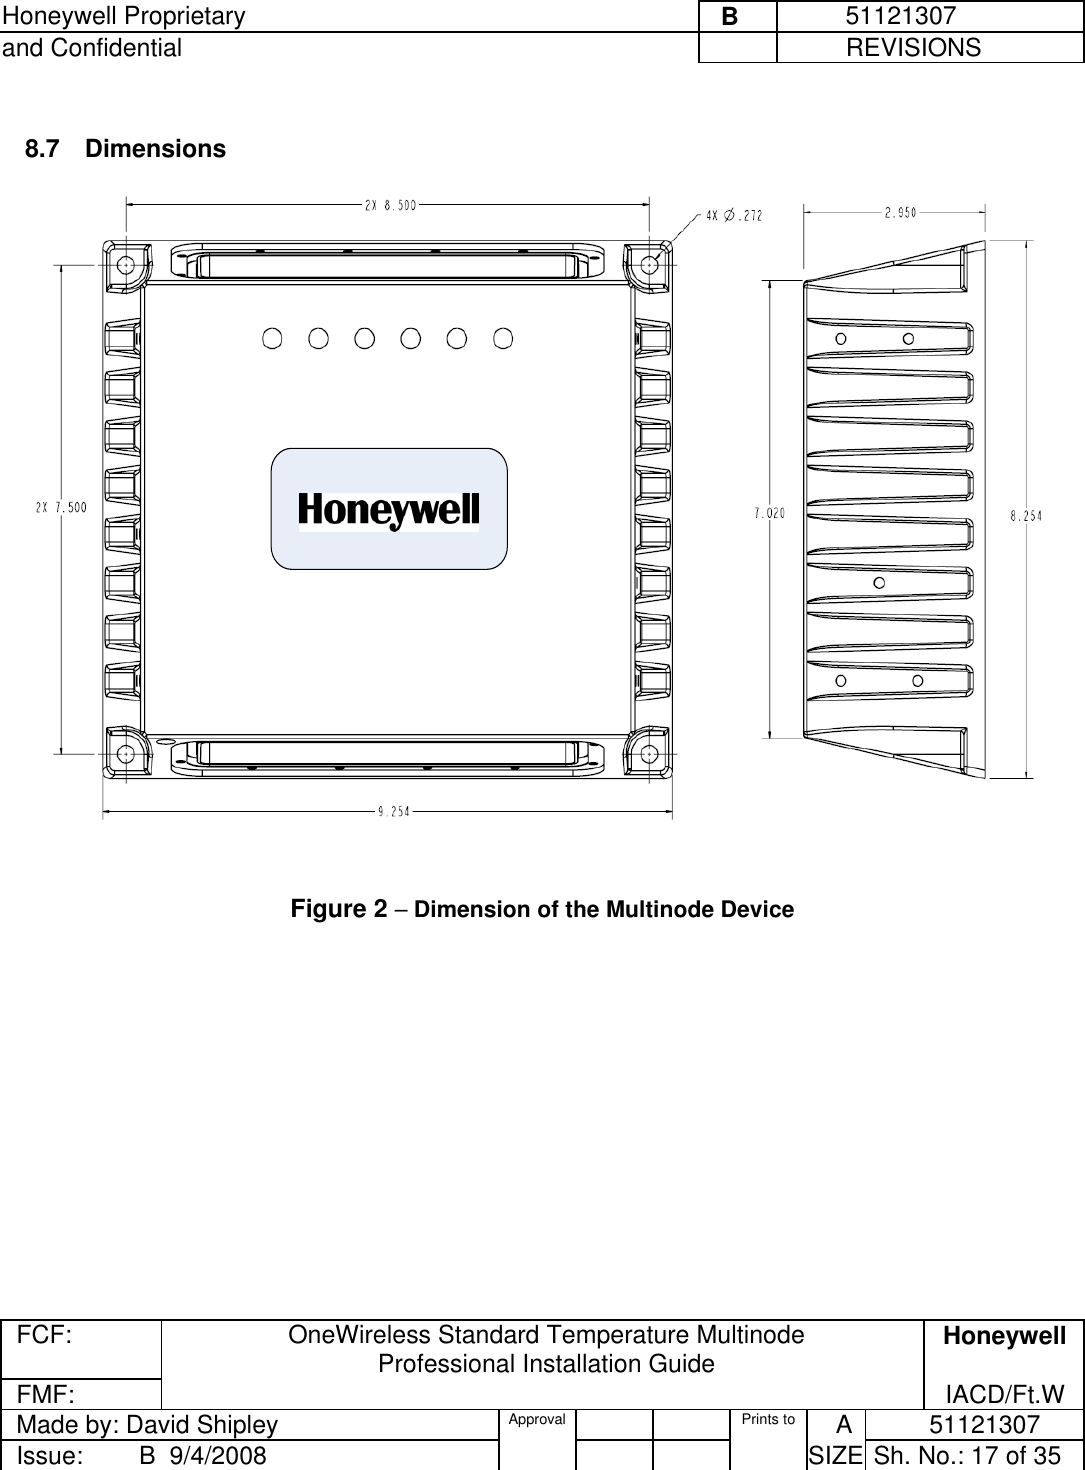 Honeywell Proprietary     B          51121307 and Confidential             REVISIONS  FCF: OneWireless Standard Temperature Multinode  Professional Installation Guide  Honeywell FMF:               IACD/Ft.W Made by: David Shipley  Approval   Prints to     A           51121307 Issue:        B  9/4/2008          SIZE  Sh. No.: 17 of 35   8.7 Dimensions    Figure 2 – Dimension of the Multinode Device   